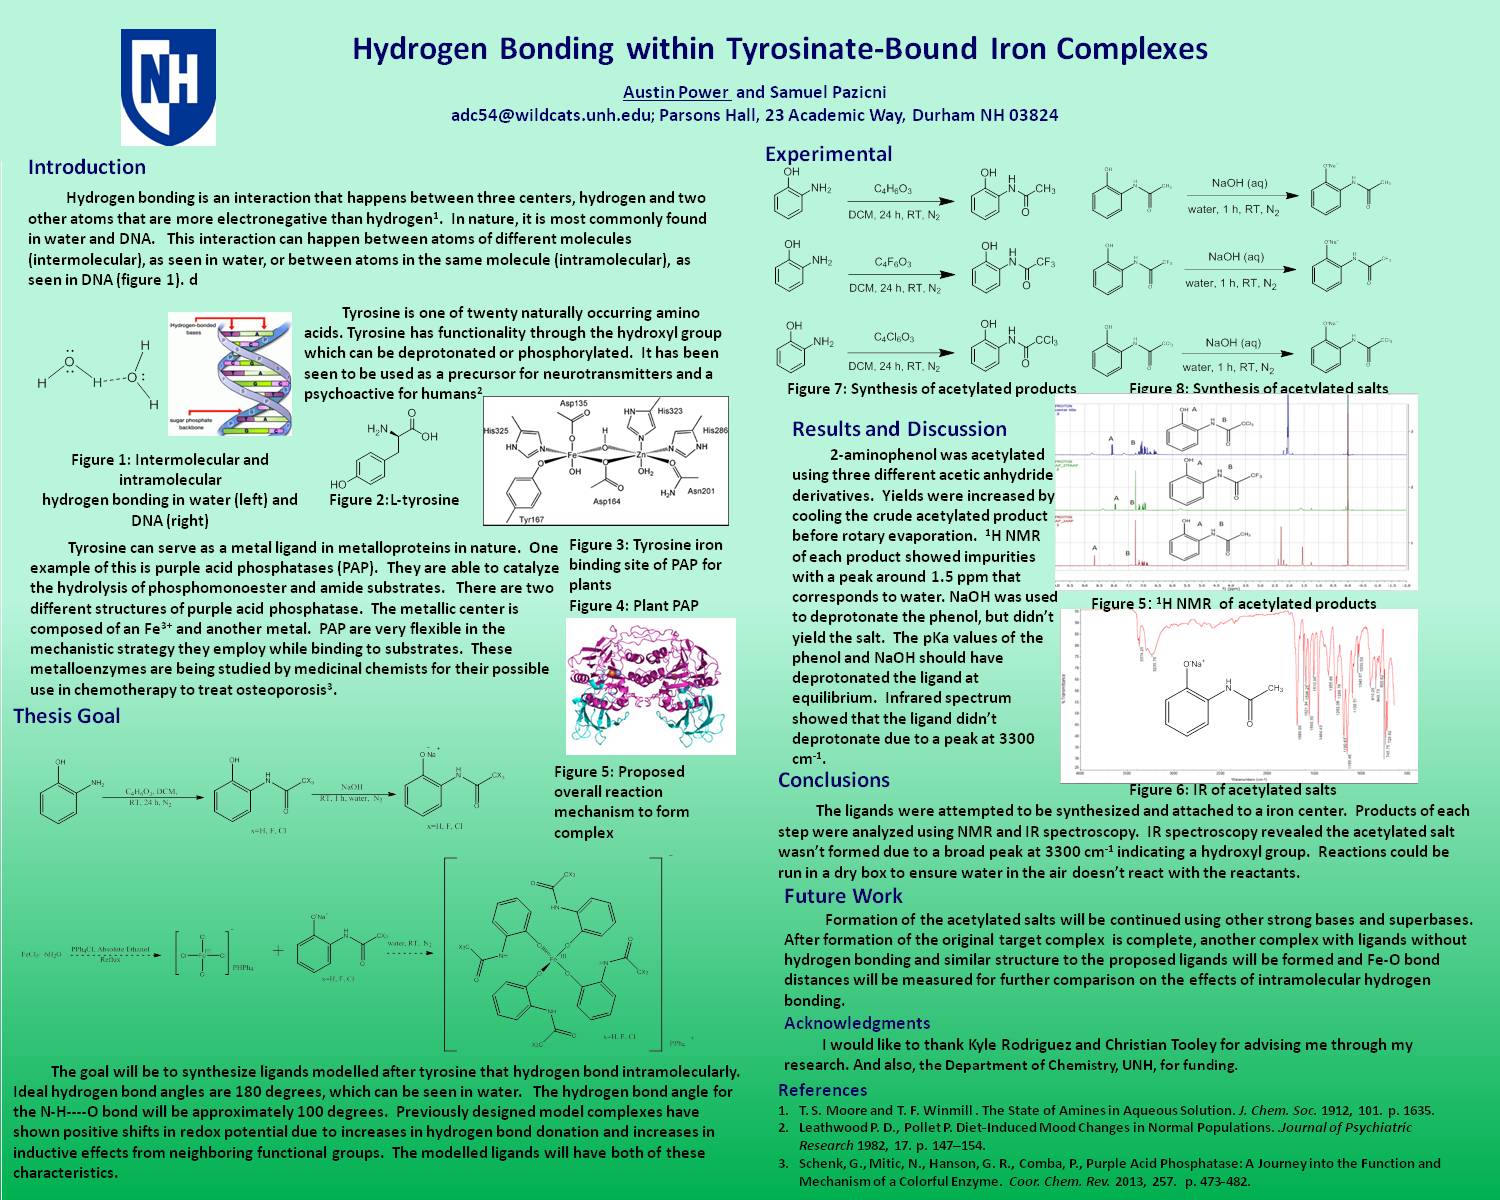 Hydrogen Bonding Within Tyrosinate-Bound Iron Complexes by adc54